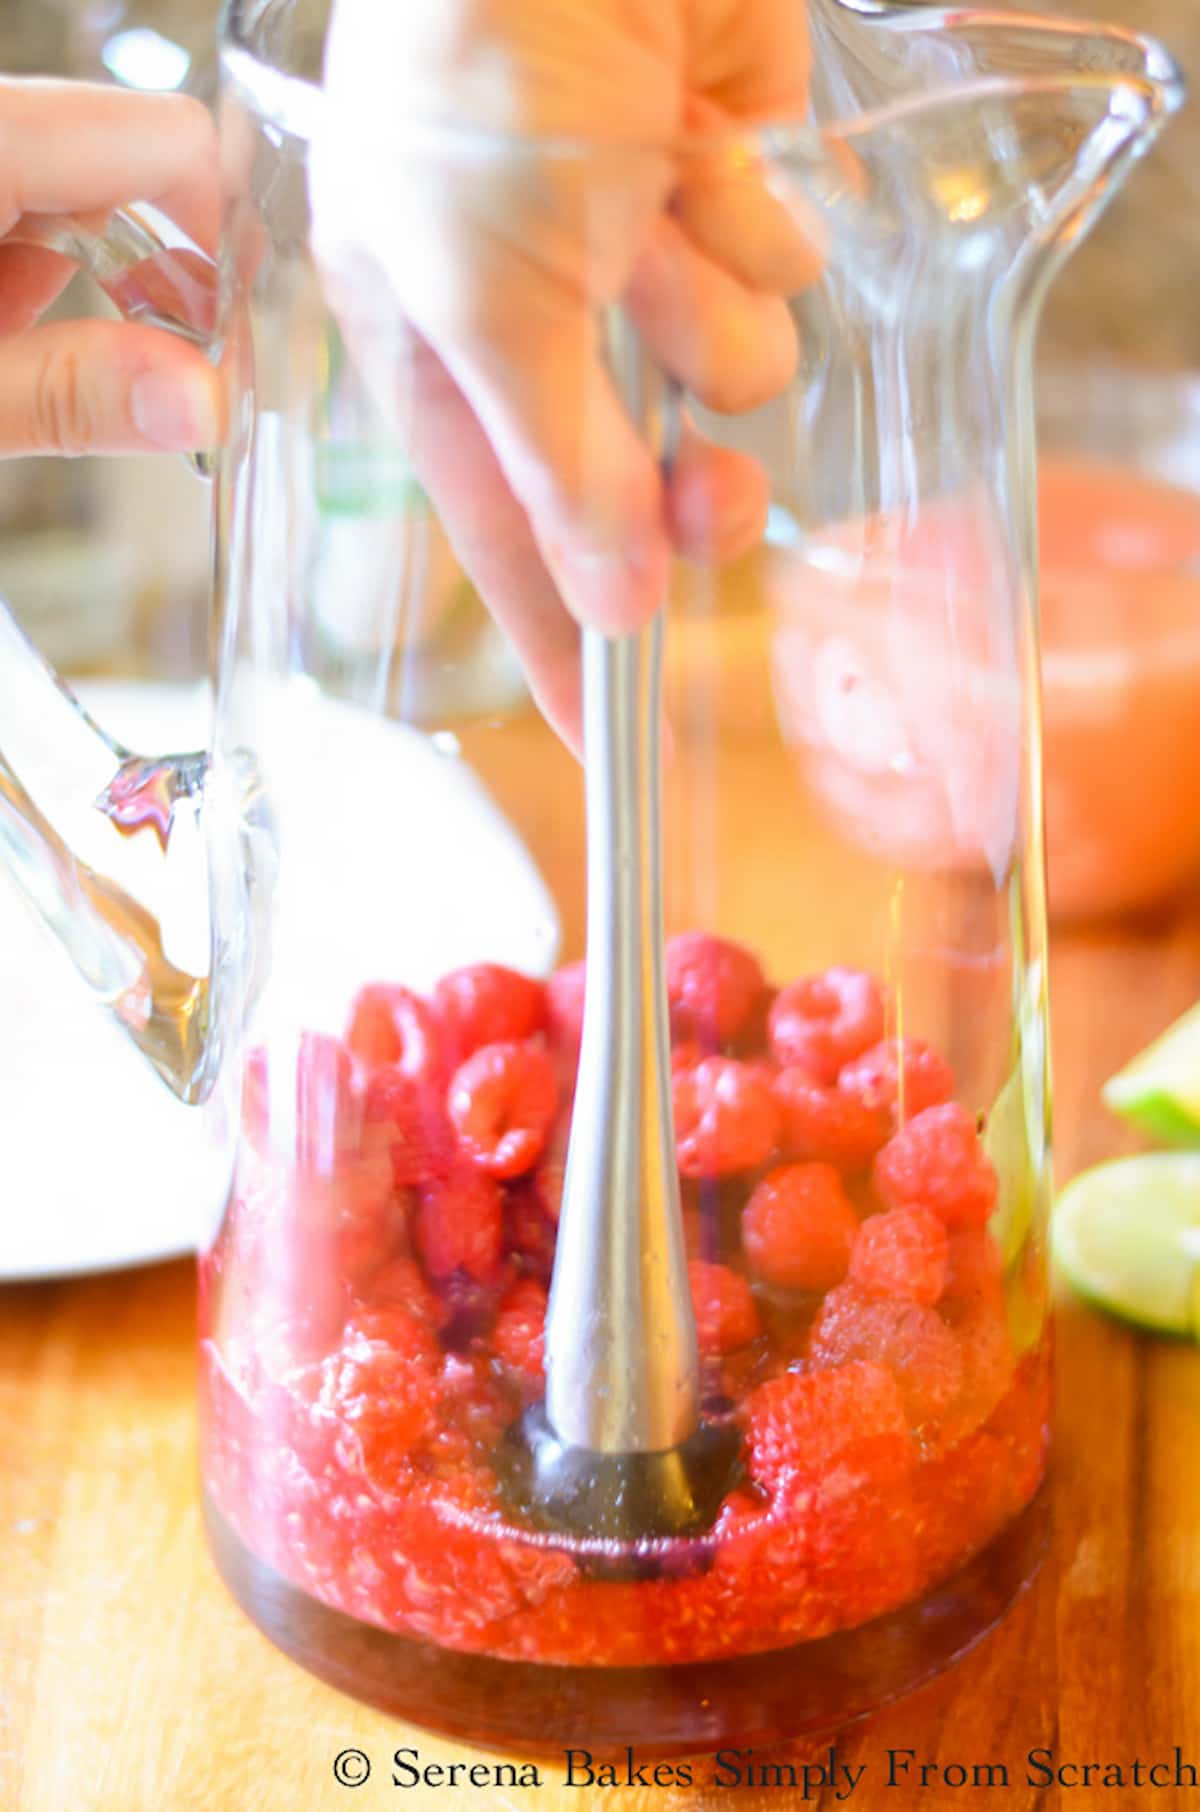 Macerating Raspberries with Agave Nectar in a glass pitcher using a stainless steel macerator.